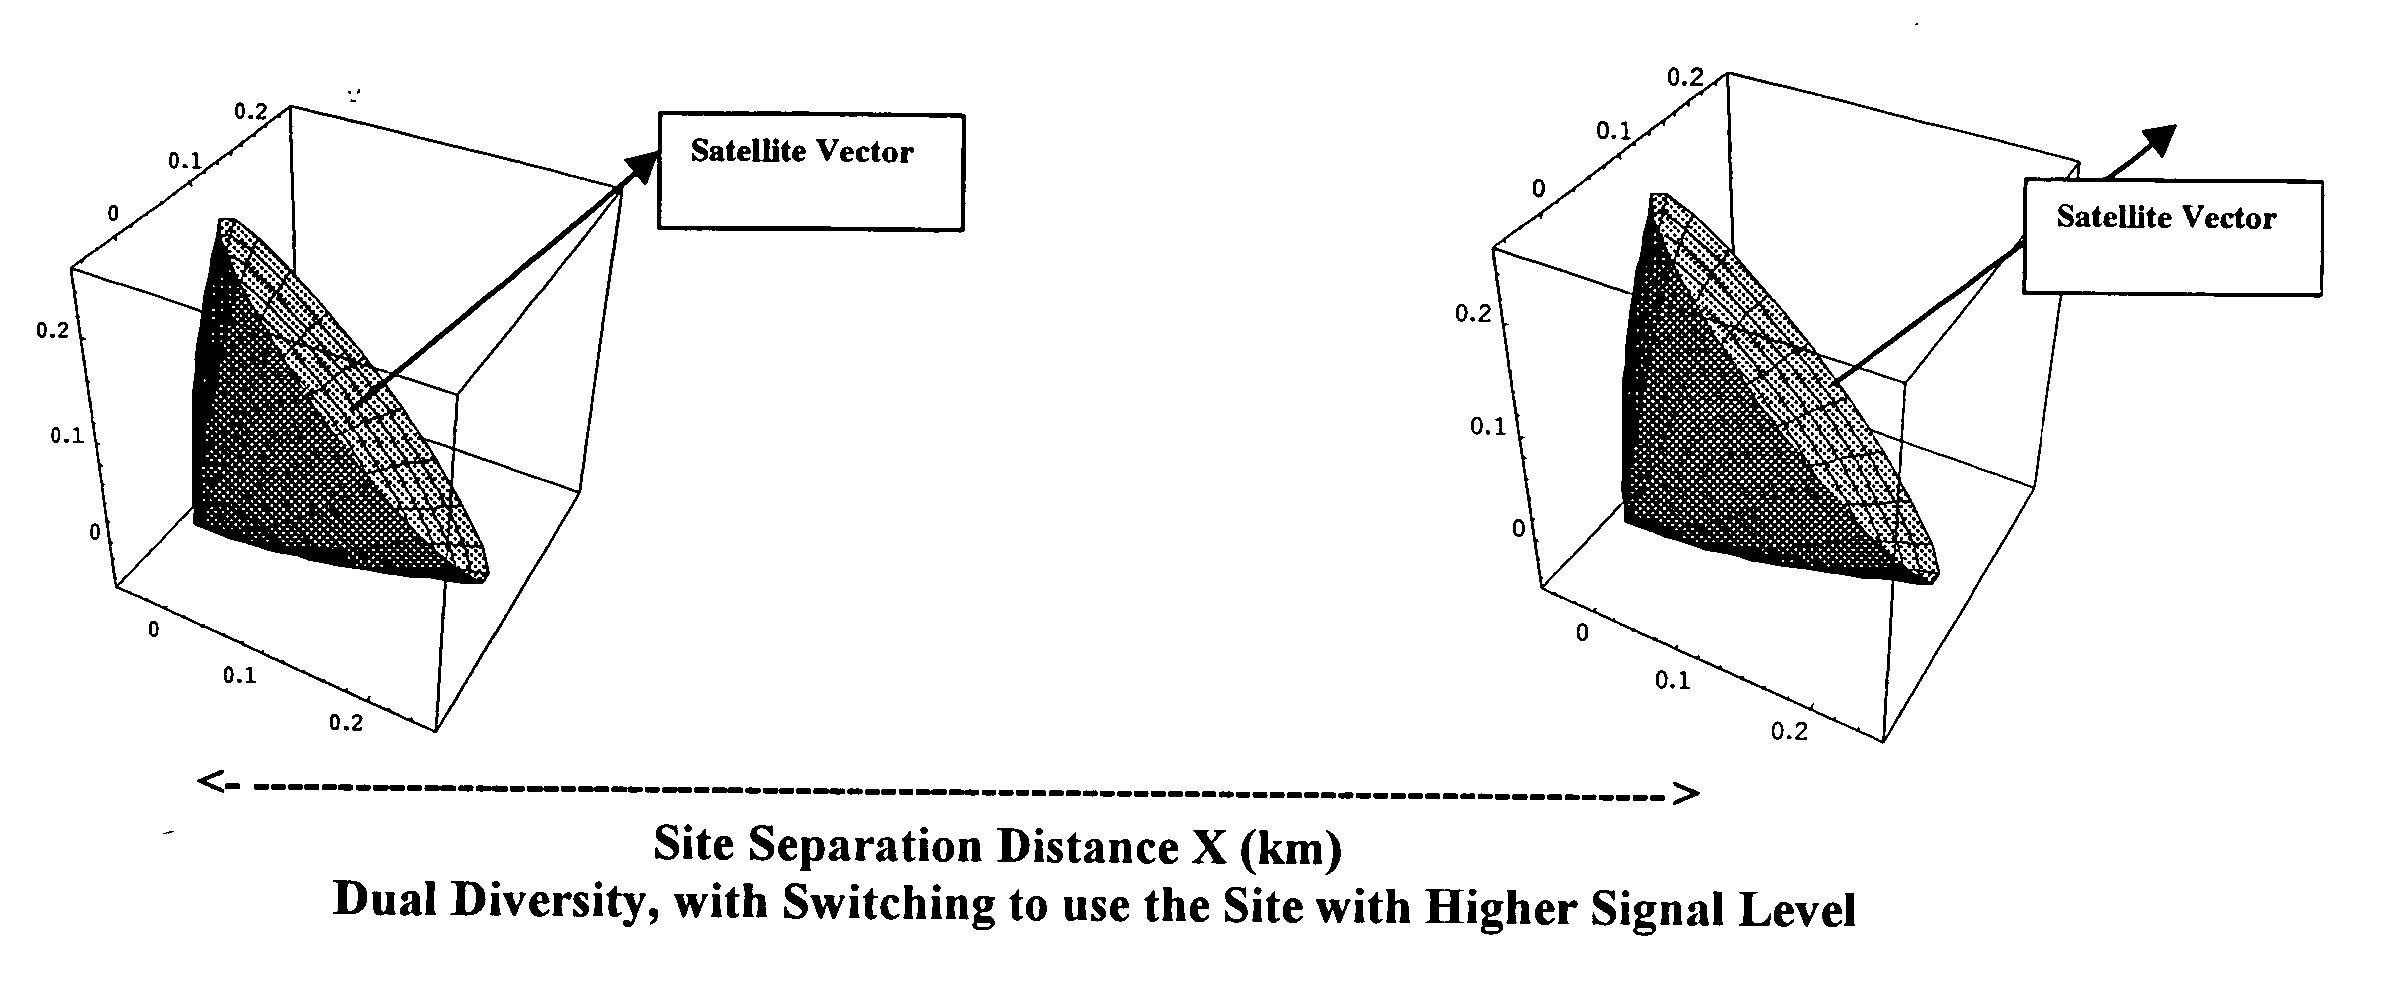 Method to extend millimeter wave satellite communication (75-98 GHz) and 3-10 micron laser links to wide areas in the temperate zone